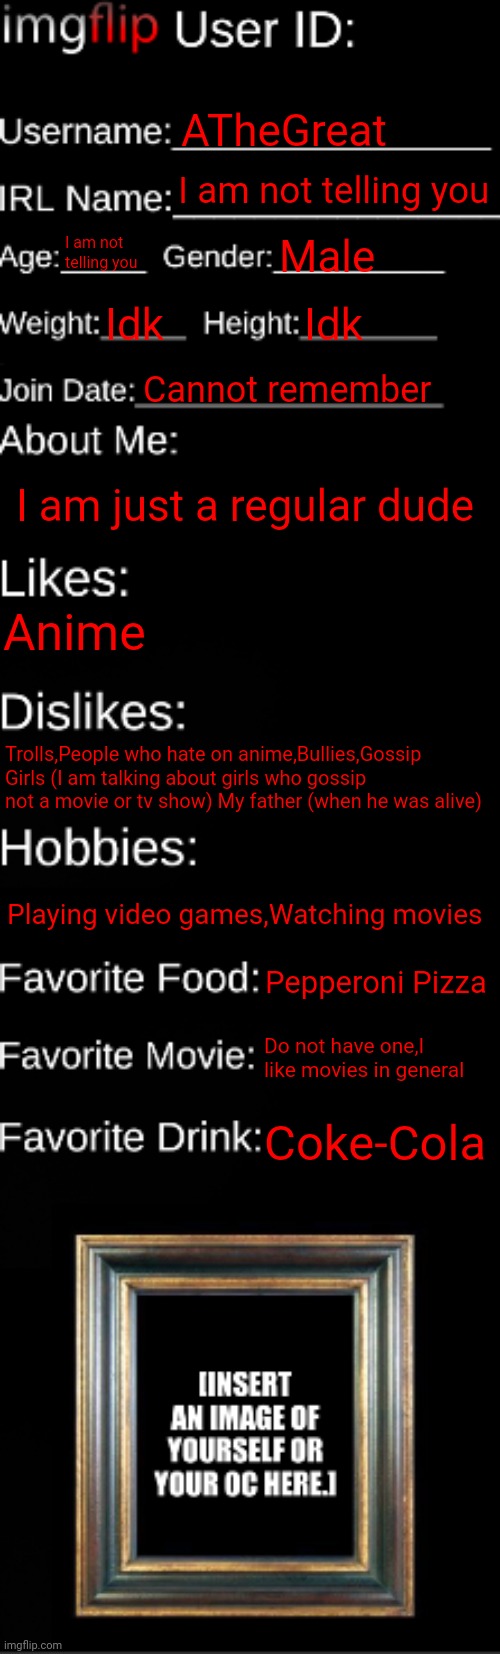 I do not have an oc | ATheGreat; I am not telling you; I am not telling you; Male; Idk; Idk; Cannot remember; I am just a regular dude; Anime; Trolls,People who hate on anime,Bullies,Gossip Girls (I am talking about girls who gossip not a movie or tv show) My father (when he was alive); Playing video games,Watching movies; Pepperoni Pizza; Do not have one,I like movies in general; Coke-Cola | image tagged in imgflip id card | made w/ Imgflip meme maker